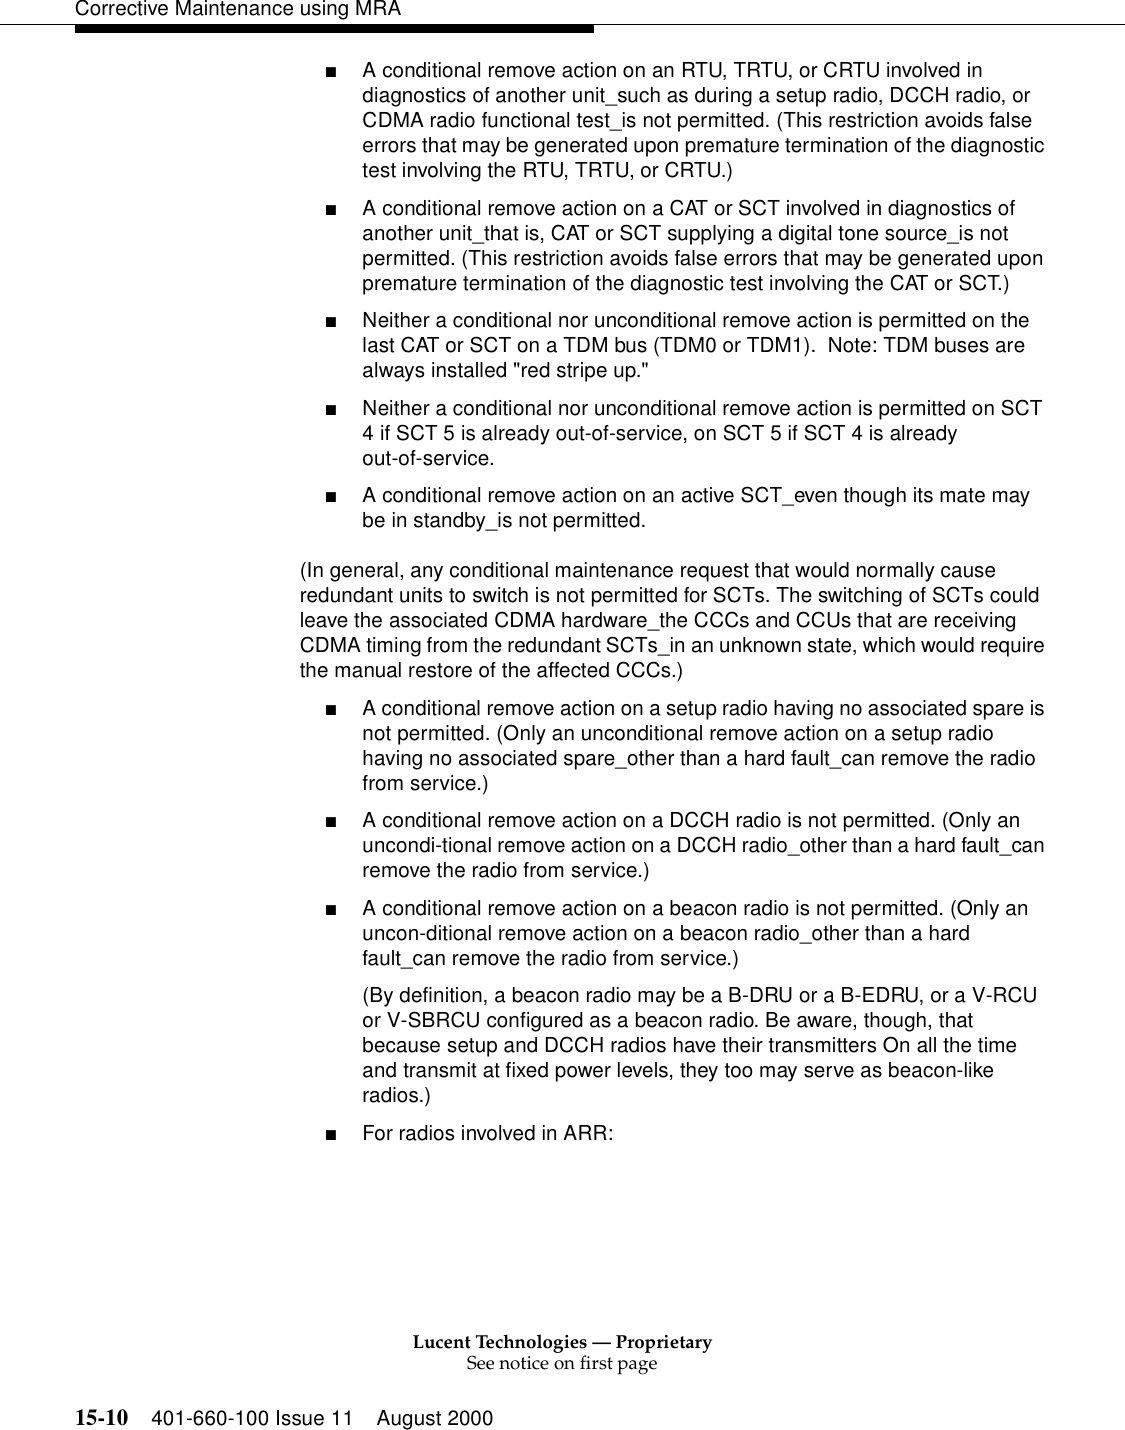 Lucent Technologies — ProprietarySee notice on first page15-10 401-660-100 Issue 11 August 2000Corrective Maintenance using MRA■A conditional remove action on an RTU, TRTU, or CRTU involved in diagnostics of another unit_such as during a setup radio, DCCH radio, or CDMA radio functional test_is not permitted. (This restriction avoids false errors that may be generated upon premature termination of the diagnostic test involving the RTU, TRTU, or CRTU.) ■A conditional remove action on a CAT or SCT involved in diagnostics of another unit_that is, CAT or SCT supplying a digital tone source_is not permitted. (This restriction avoids false errors that may be generated upon premature termination of the diagnostic test involving the CAT or SCT.) ■Neither a conditional nor unconditional remove action is permitted on the last CAT or SCT on a TDM bus (TDM0 or TDM1).  Note: TDM buses are always installed &quot;red stripe up.&quot;■Neither a conditional nor unconditional remove action is permitted on SCT 4 if SCT 5 is already out-of-service, on SCT 5 if SCT 4 is already out-of-service. ■A conditional remove action on an active SCT_even though its mate may be in standby_is not permitted. (In general, any conditional maintenance request that would normally cause redundant units to switch is not permitted for SCTs. The switching of SCTs could leave the associated CDMA hardware_the CCCs and CCUs that are receiving CDMA timing from the redundant SCTs_in an unknown state, which would require the manual restore of the affected CCCs.) ■A conditional remove action on a setup radio having no associated spare is not permitted. (Only an unconditional remove action on a setup radio having no associated spare_other than a hard fault_can remove the radio from service.) ■A conditional remove action on a DCCH radio is not permitted. (Only an uncondi-tional remove action on a DCCH radio_other than a hard fault_can remove the radio from service.) ■A conditional remove action on a beacon radio is not permitted. (Only an uncon-ditional remove action on a beacon radio_other than a hard fault_can remove the radio from service.) (By definition, a beacon radio may be a B-DRU or a B-EDRU, or a V-RCU or V-SBRCU configured as a beacon radio. Be aware, though, that because setup and DCCH radios have their transmitters On all the time and transmit at fixed power levels, they too may serve as beacon-like radios.) ■For radios involved in ARR: 